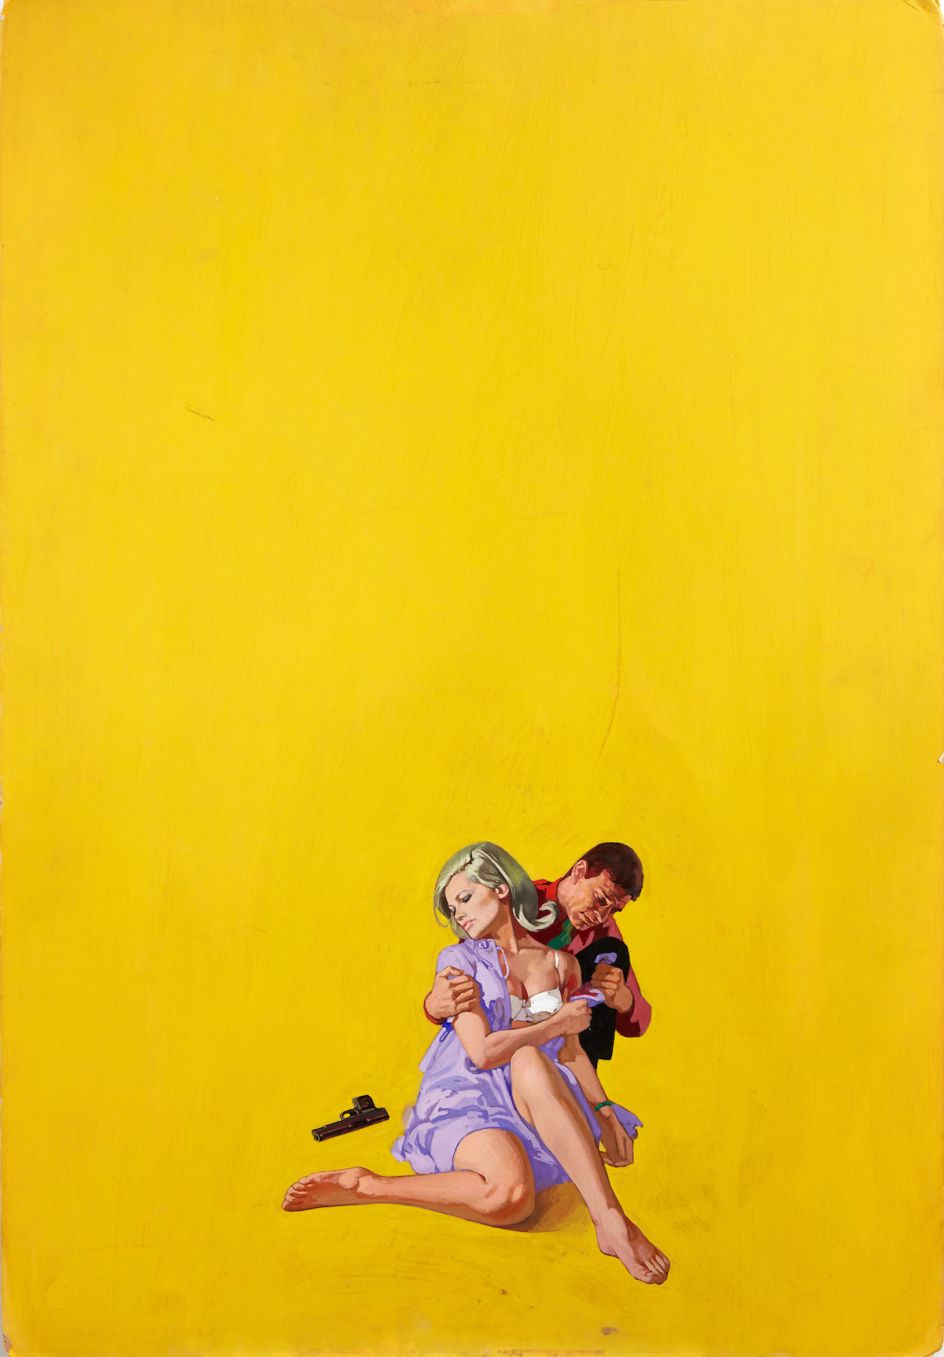 Renato Fratini, The Twisted Thing, 1967, gouache on board, copyright Lever Gallery